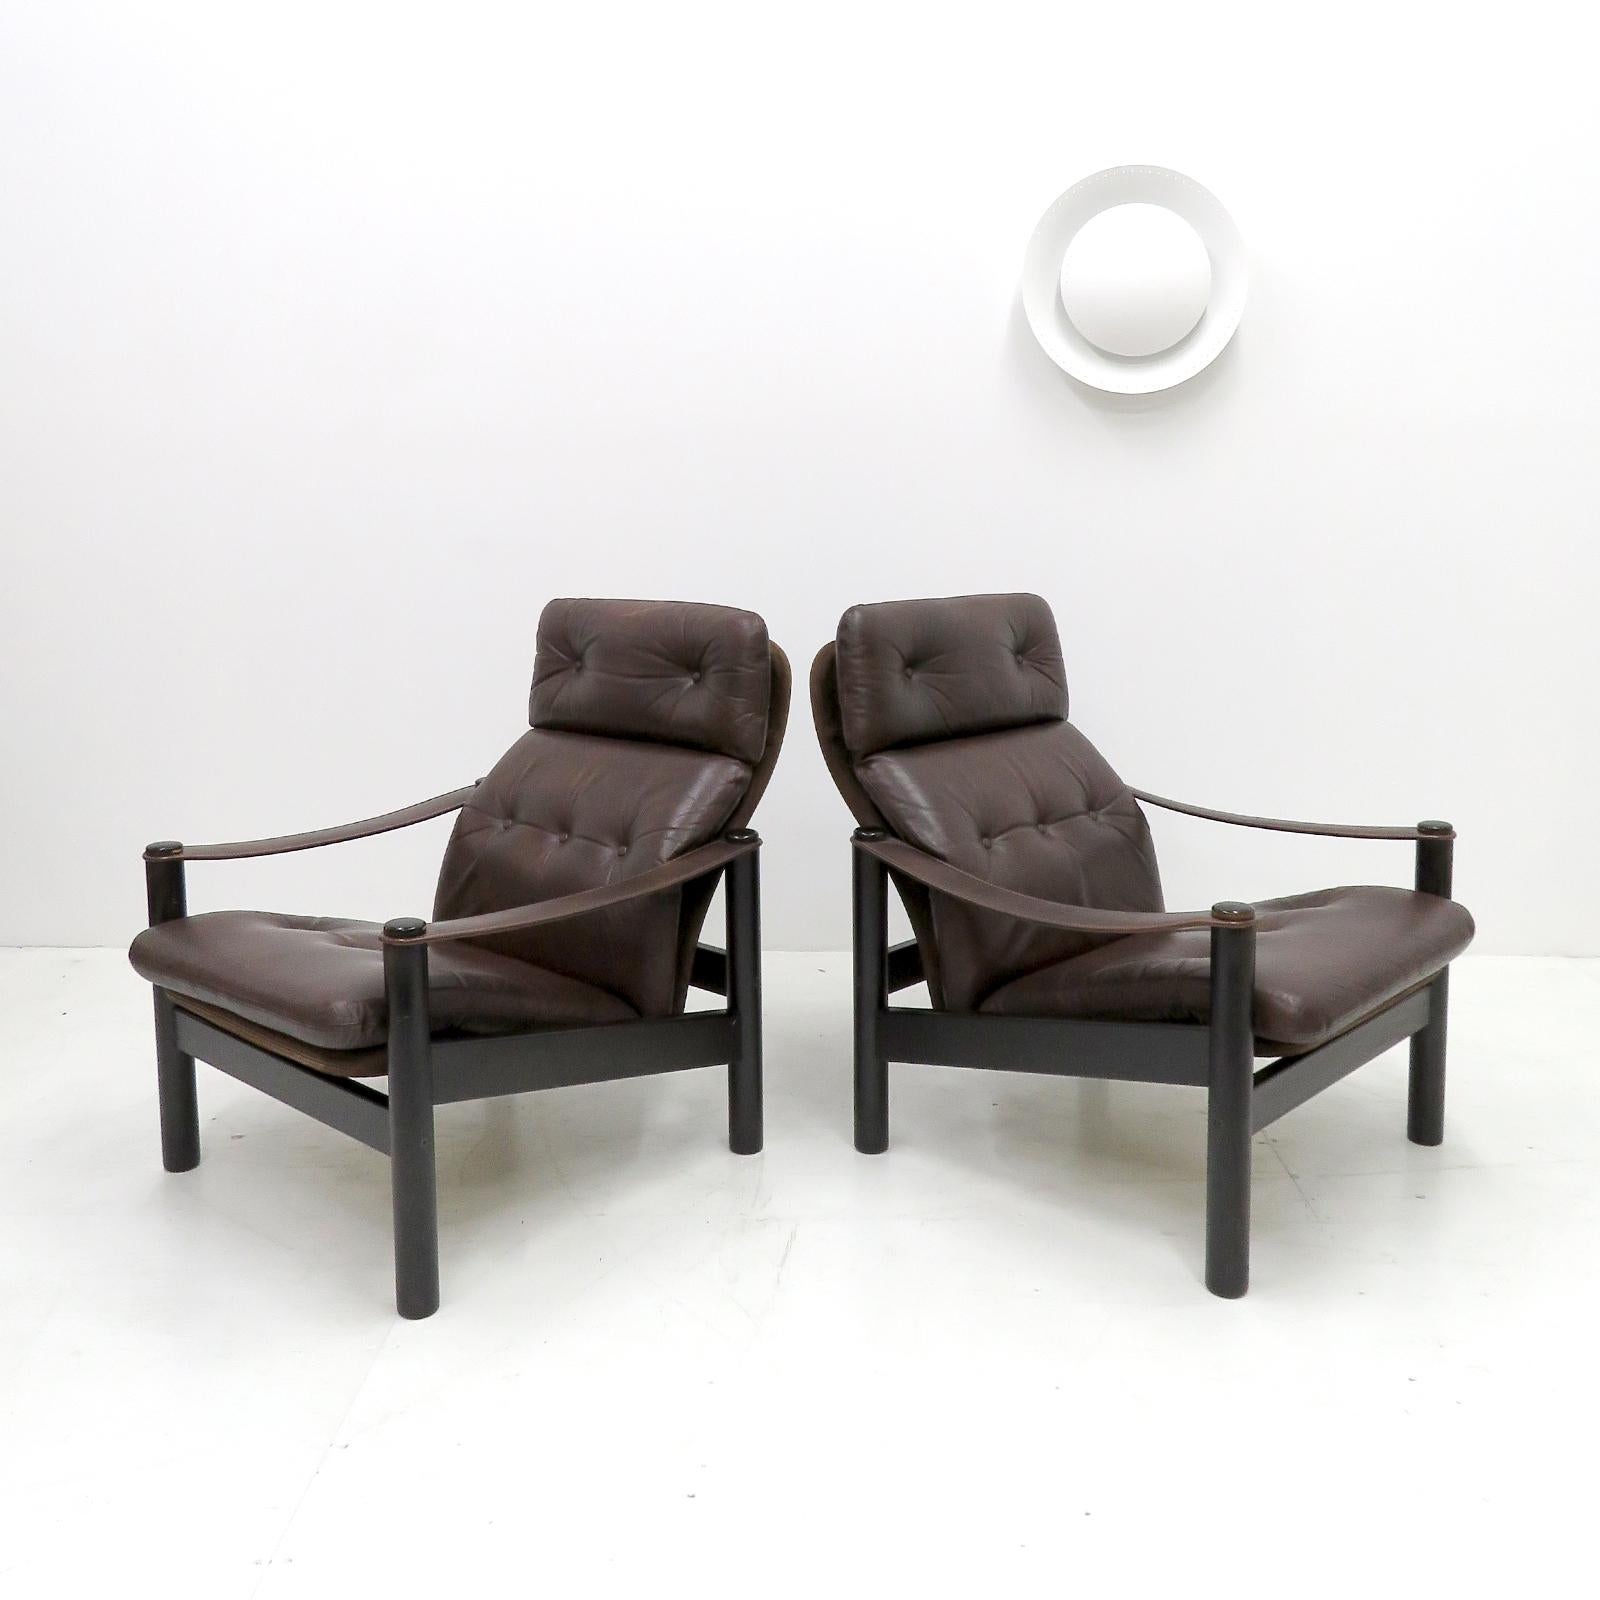 Danish Leather Lounge Chairs by Ebbe Gehl & Søren Nissen, 1970 For Sale 3